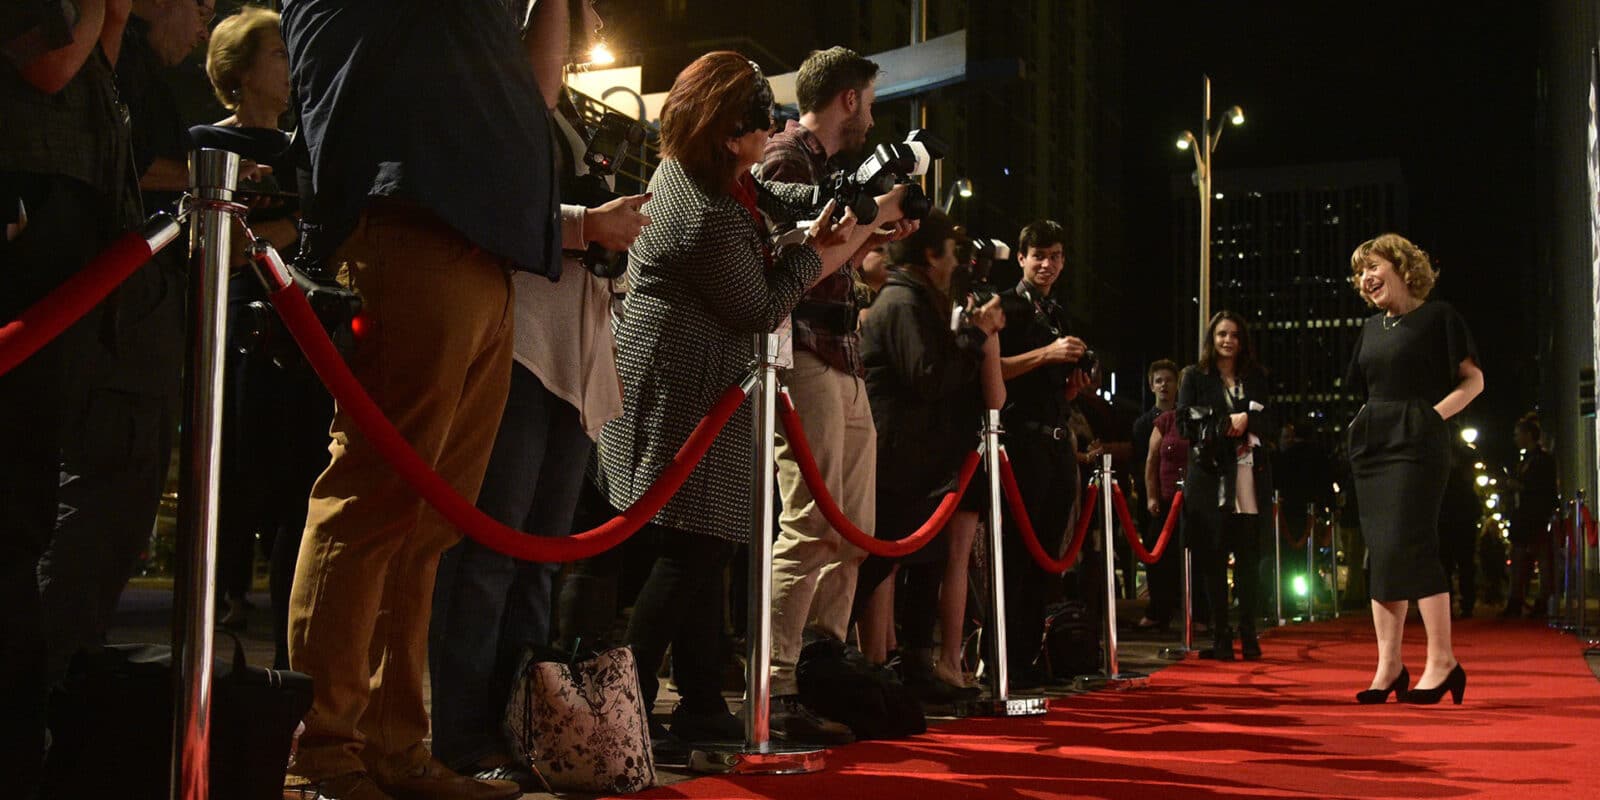 Red carpet appearance at a film festival